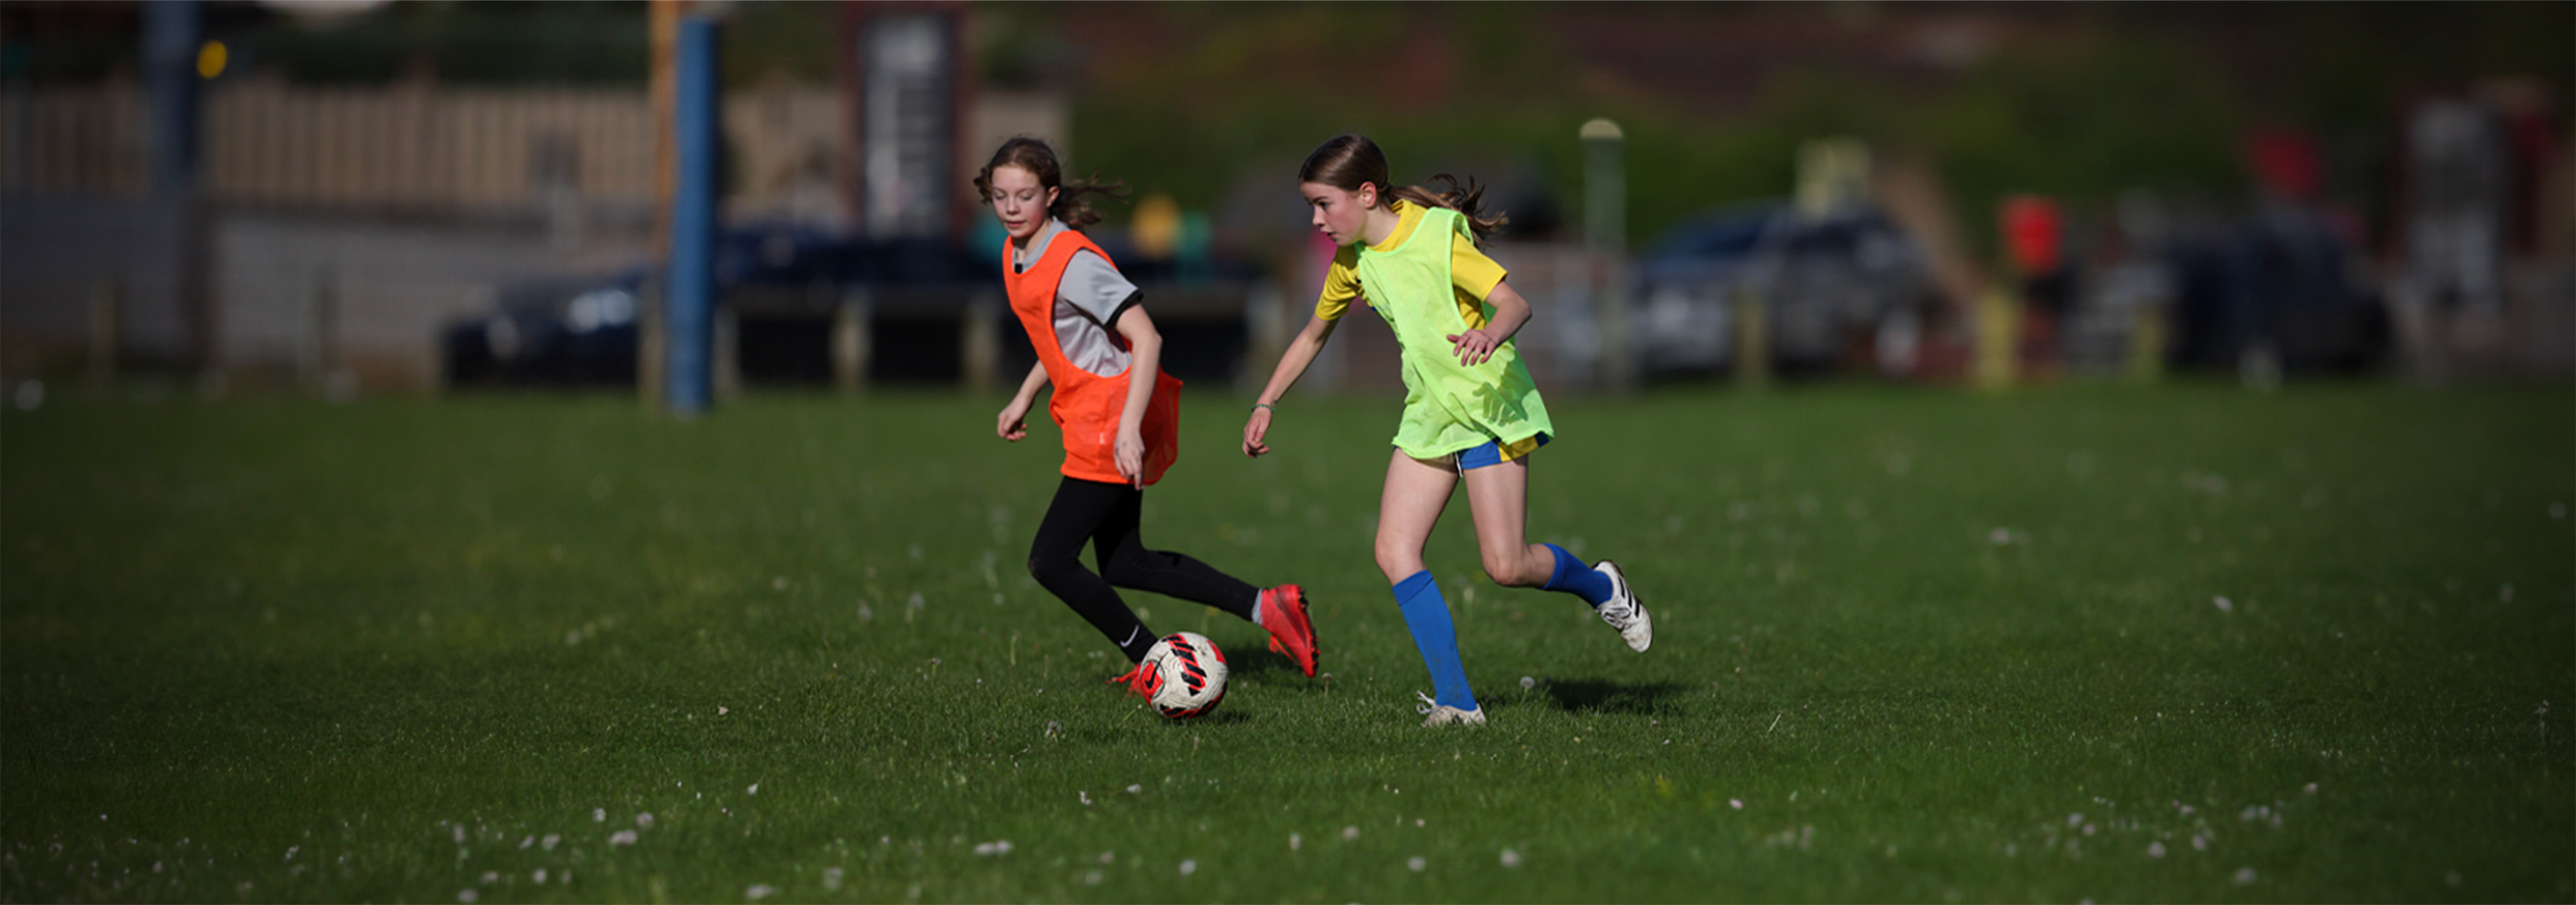 A young girl in a yellow bib runs forward with the ball on a grass pitch, with an orange-bibbed opponent to her right.